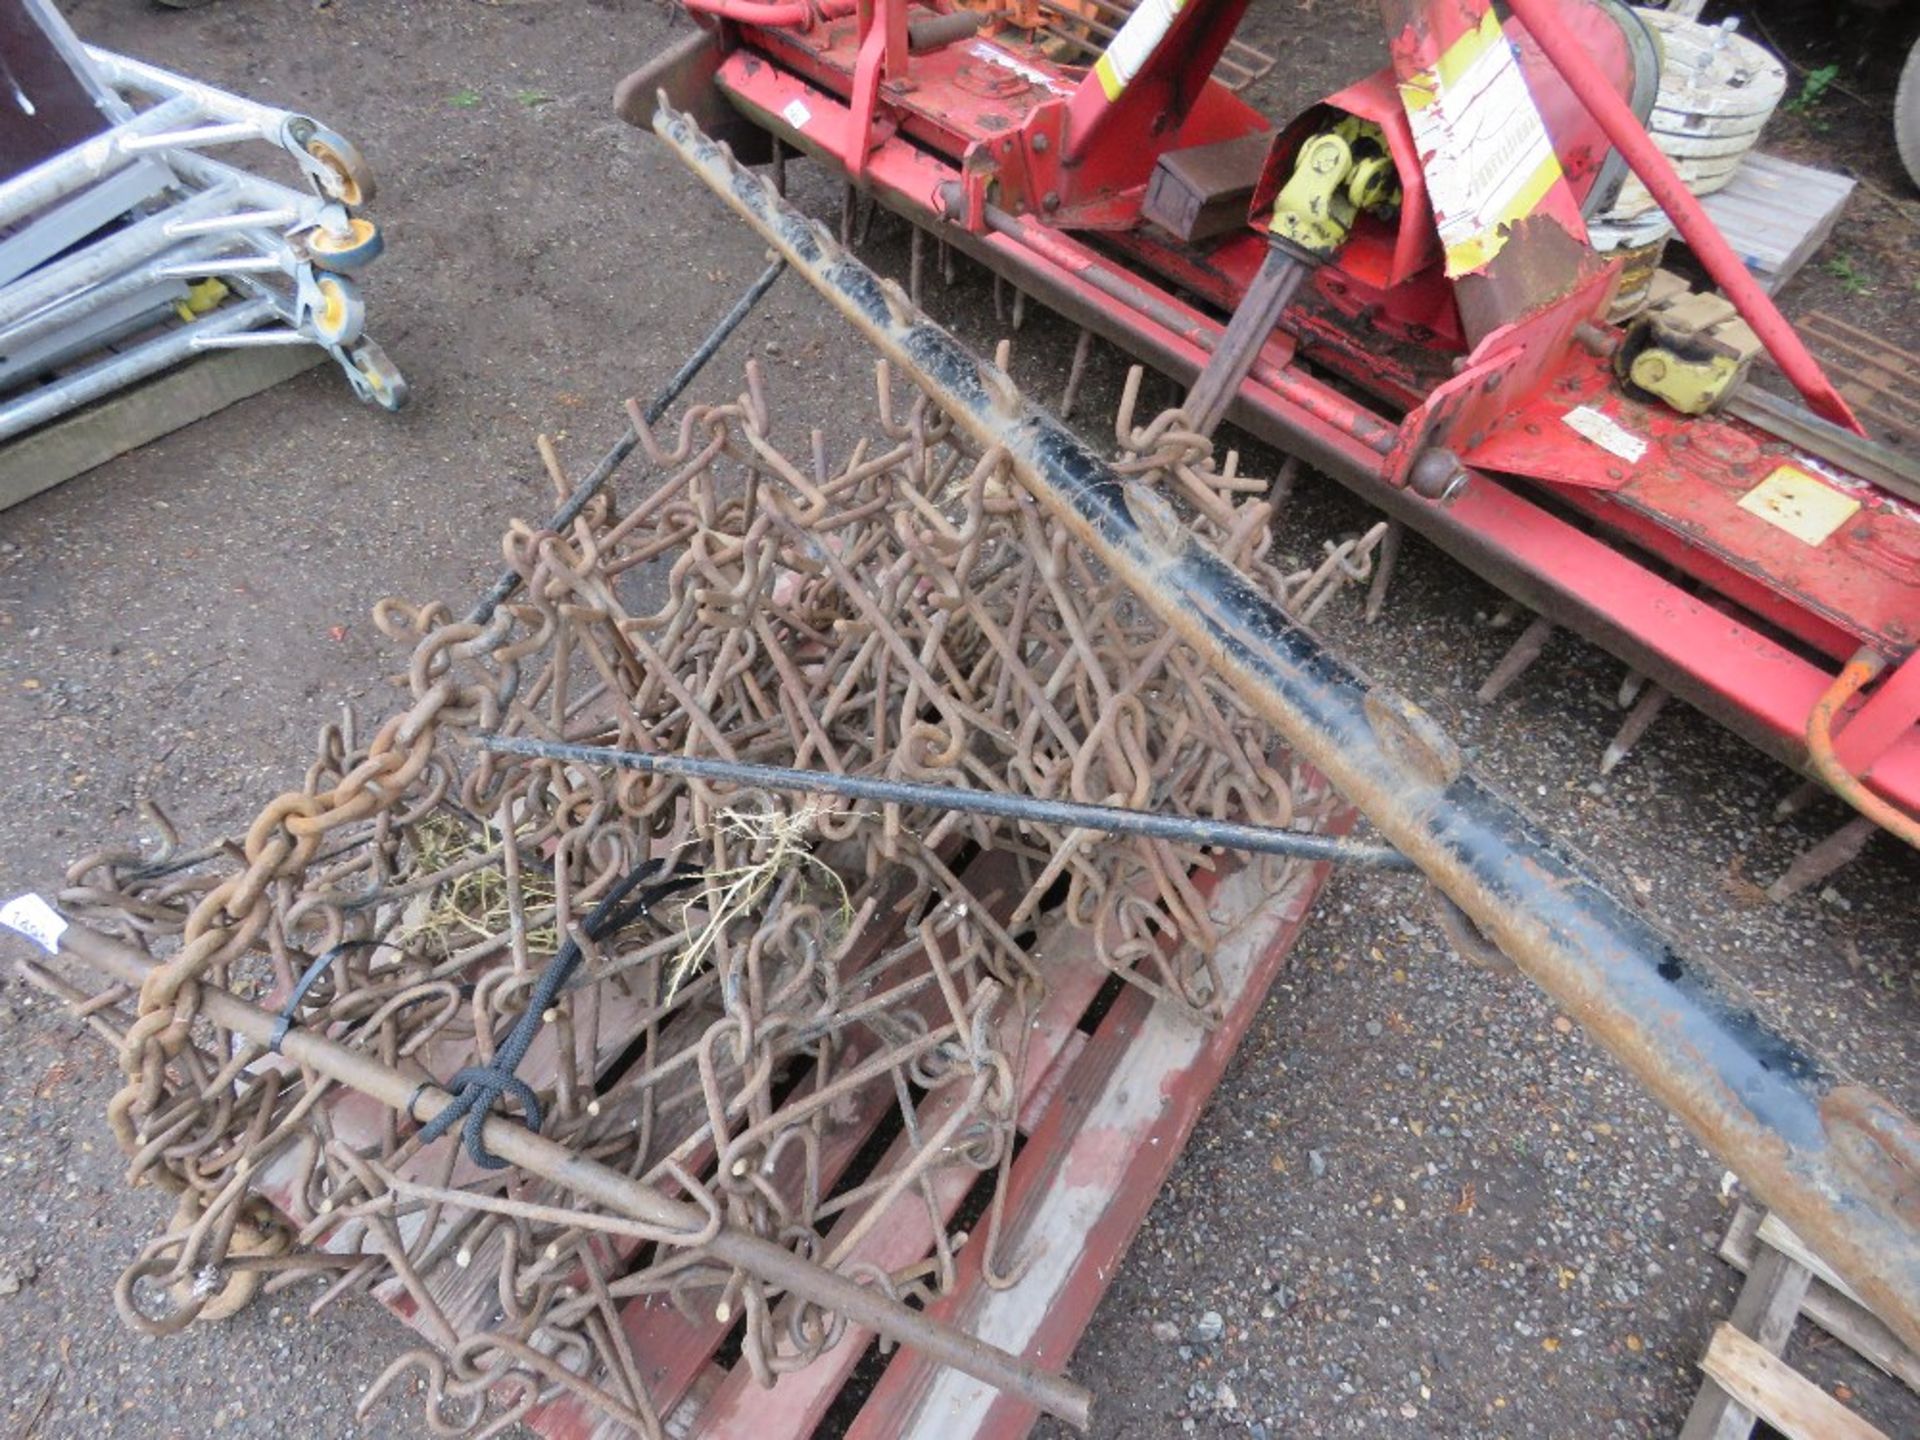 SET OF TOWED GRASS HARROWS WITH BAR, 8FT WIDTHE APPROX. DIRECT FROM LOCAL FARM. - Image 3 of 3